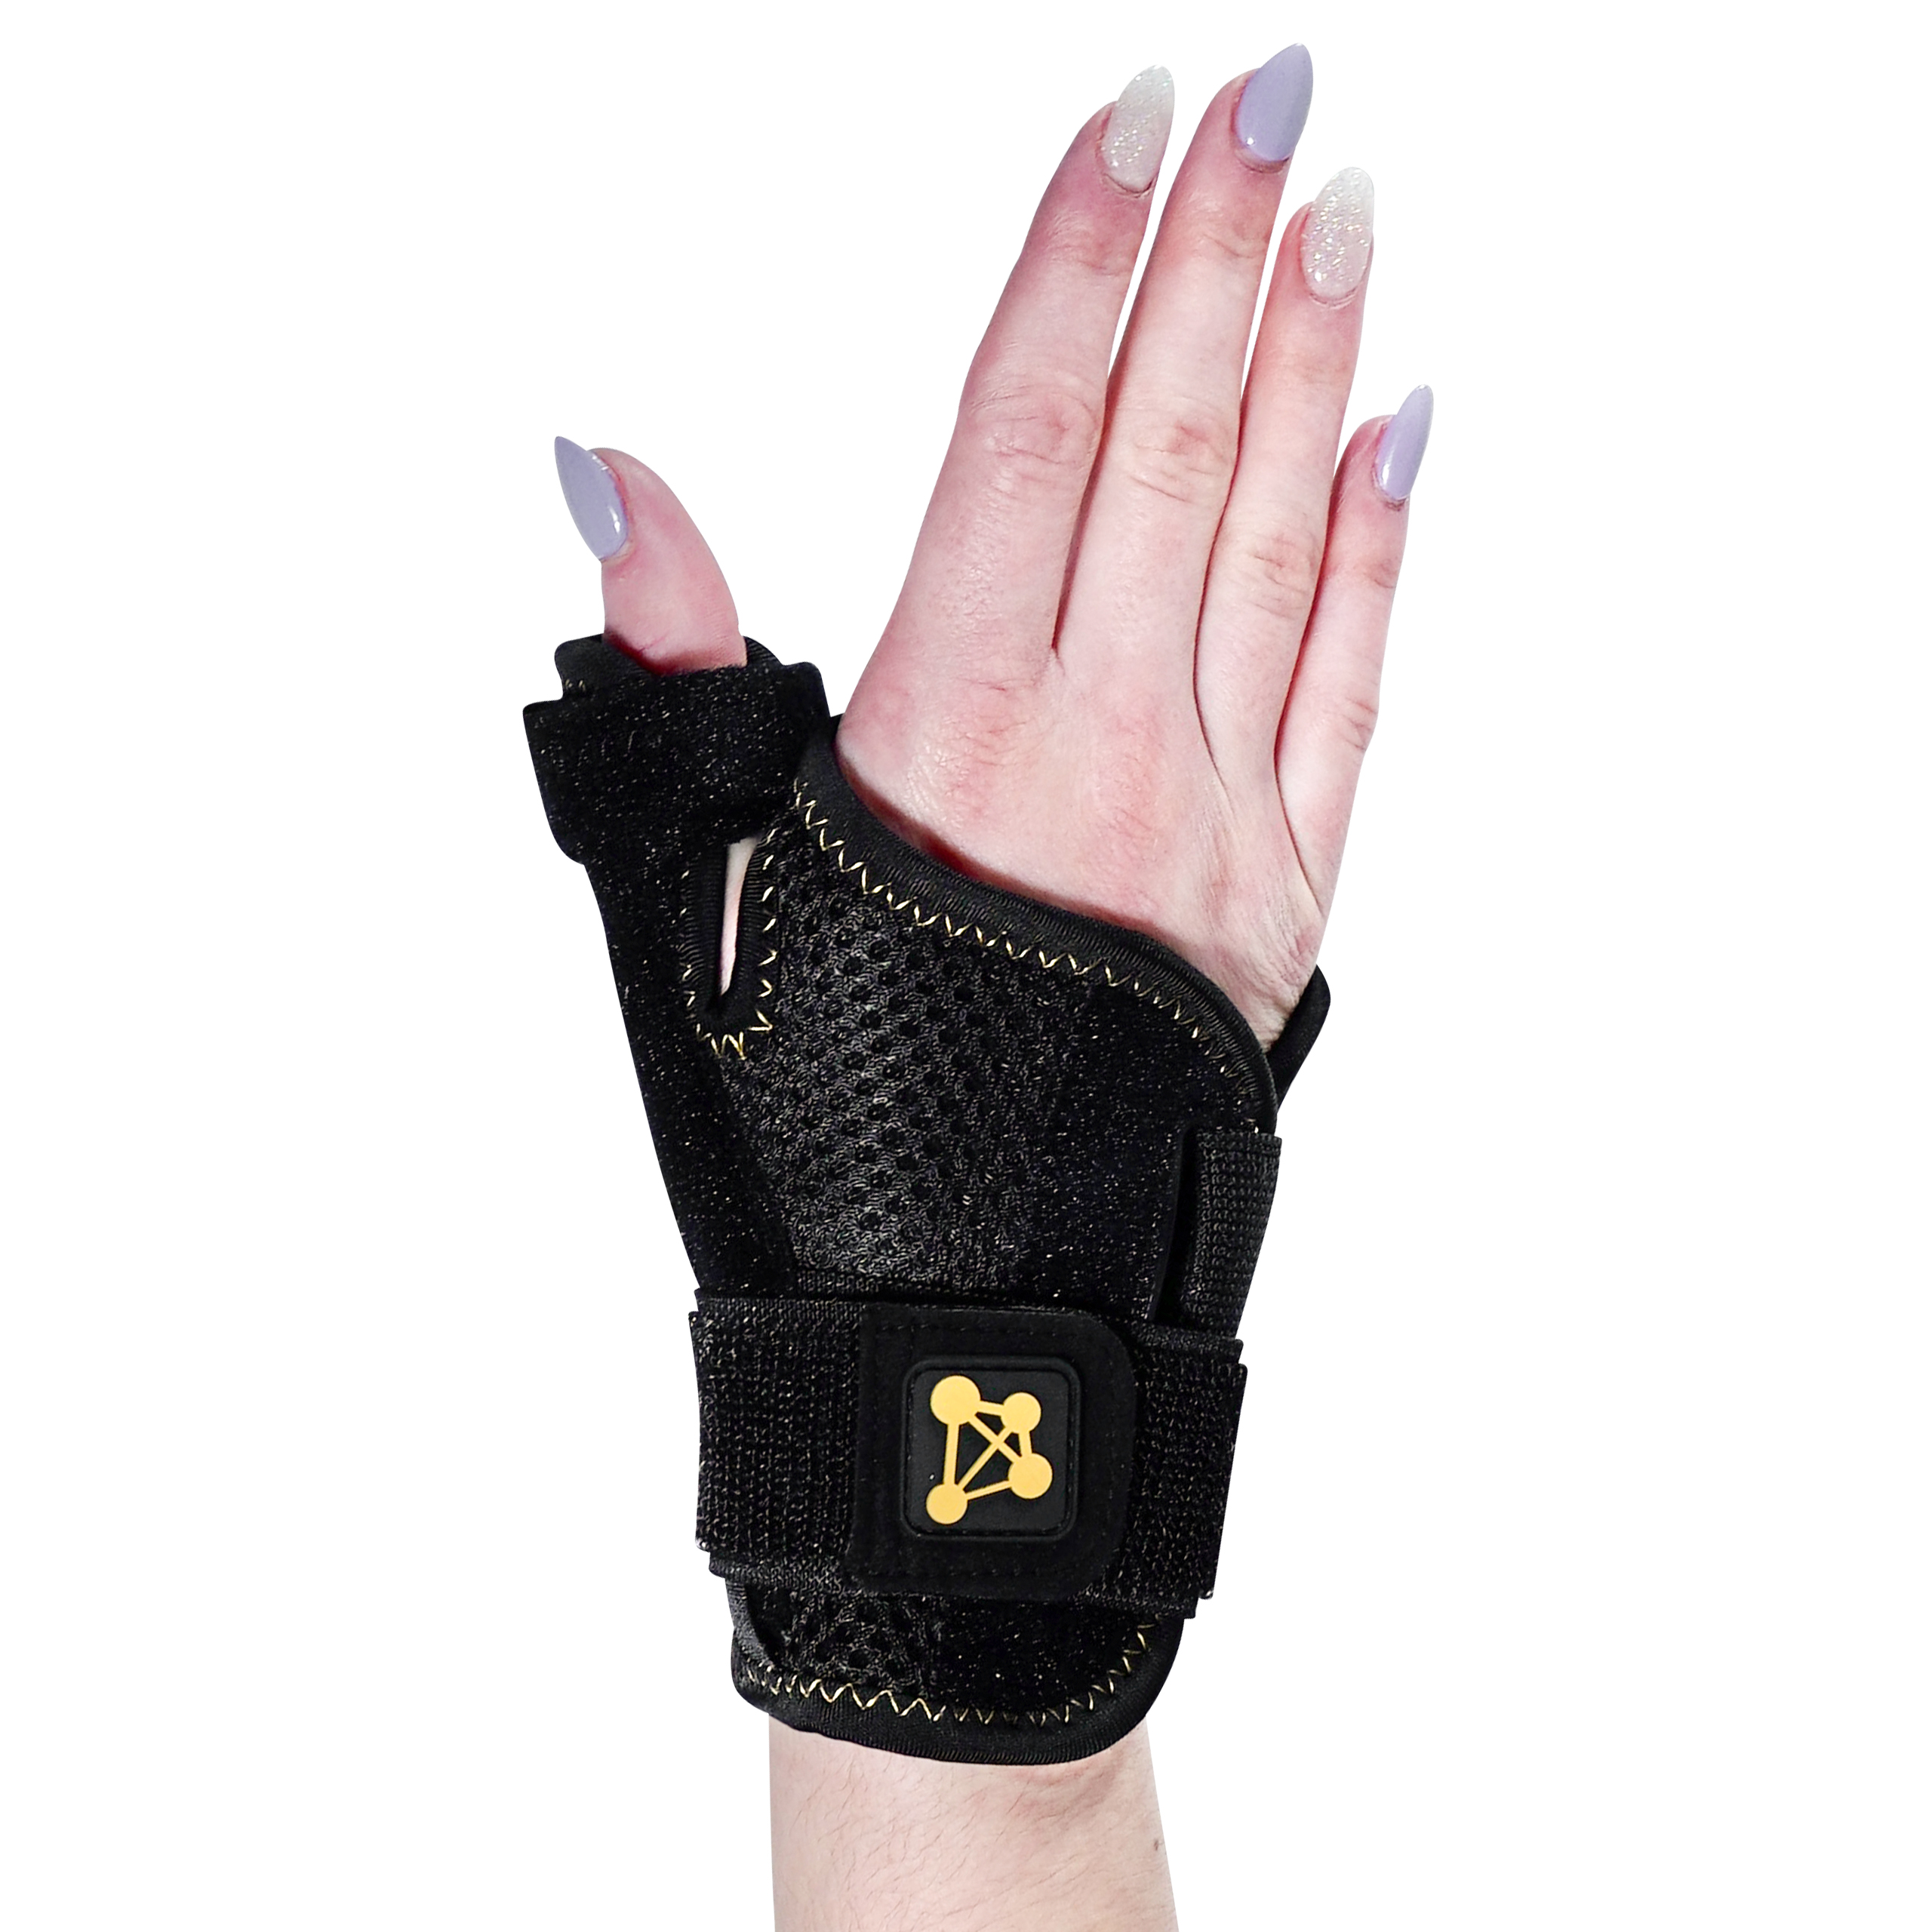 CopperJoint Releases New thumb Brace To Great Response 